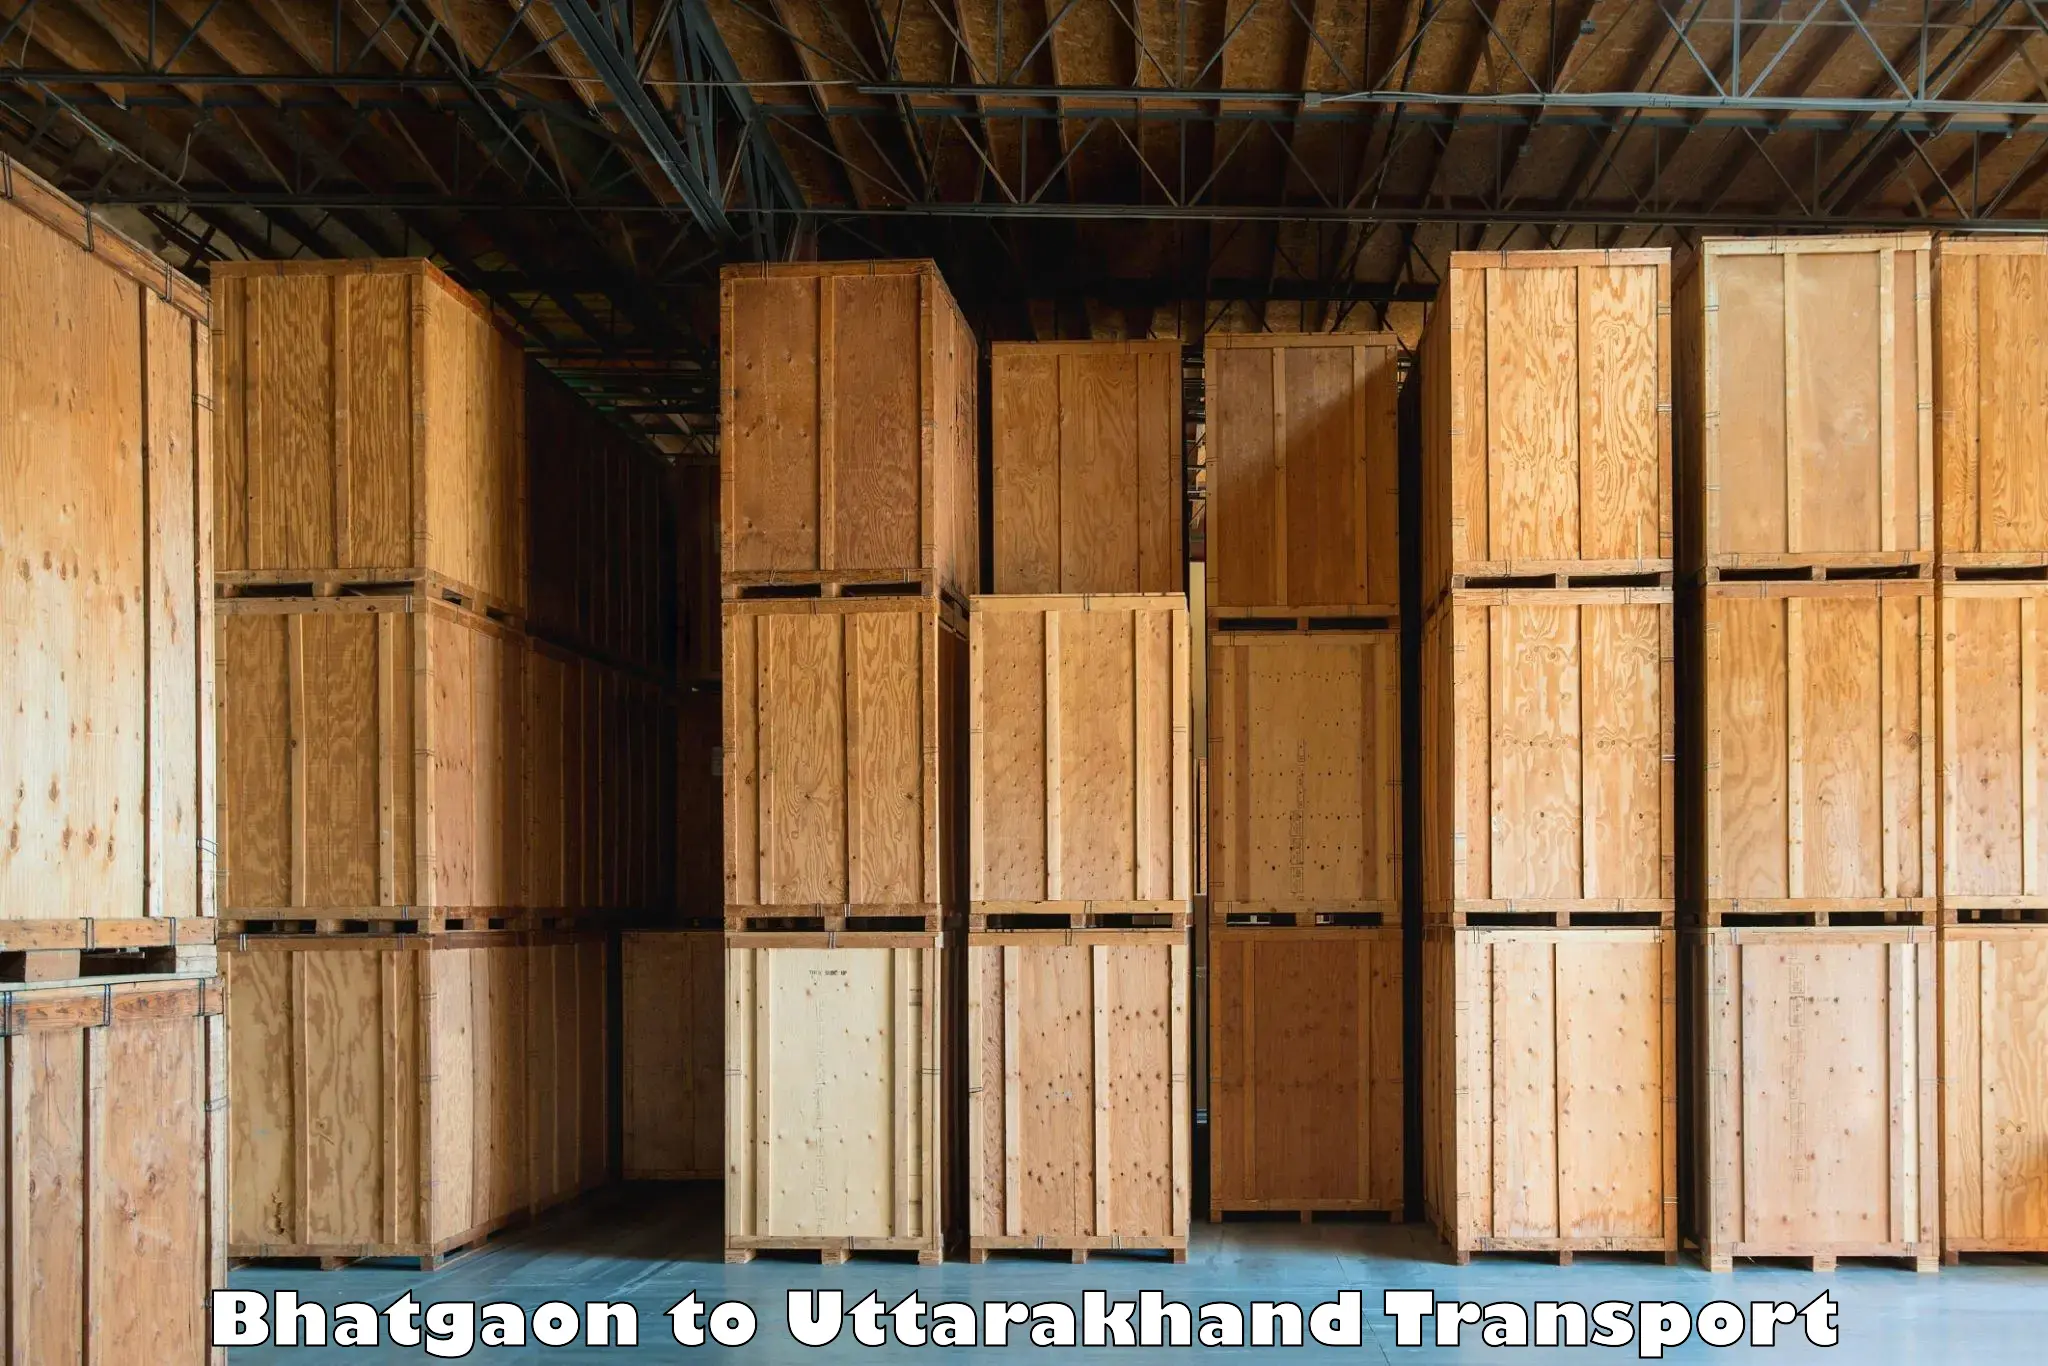 Air freight transport services in Bhatgaon to Pauri Garhwal